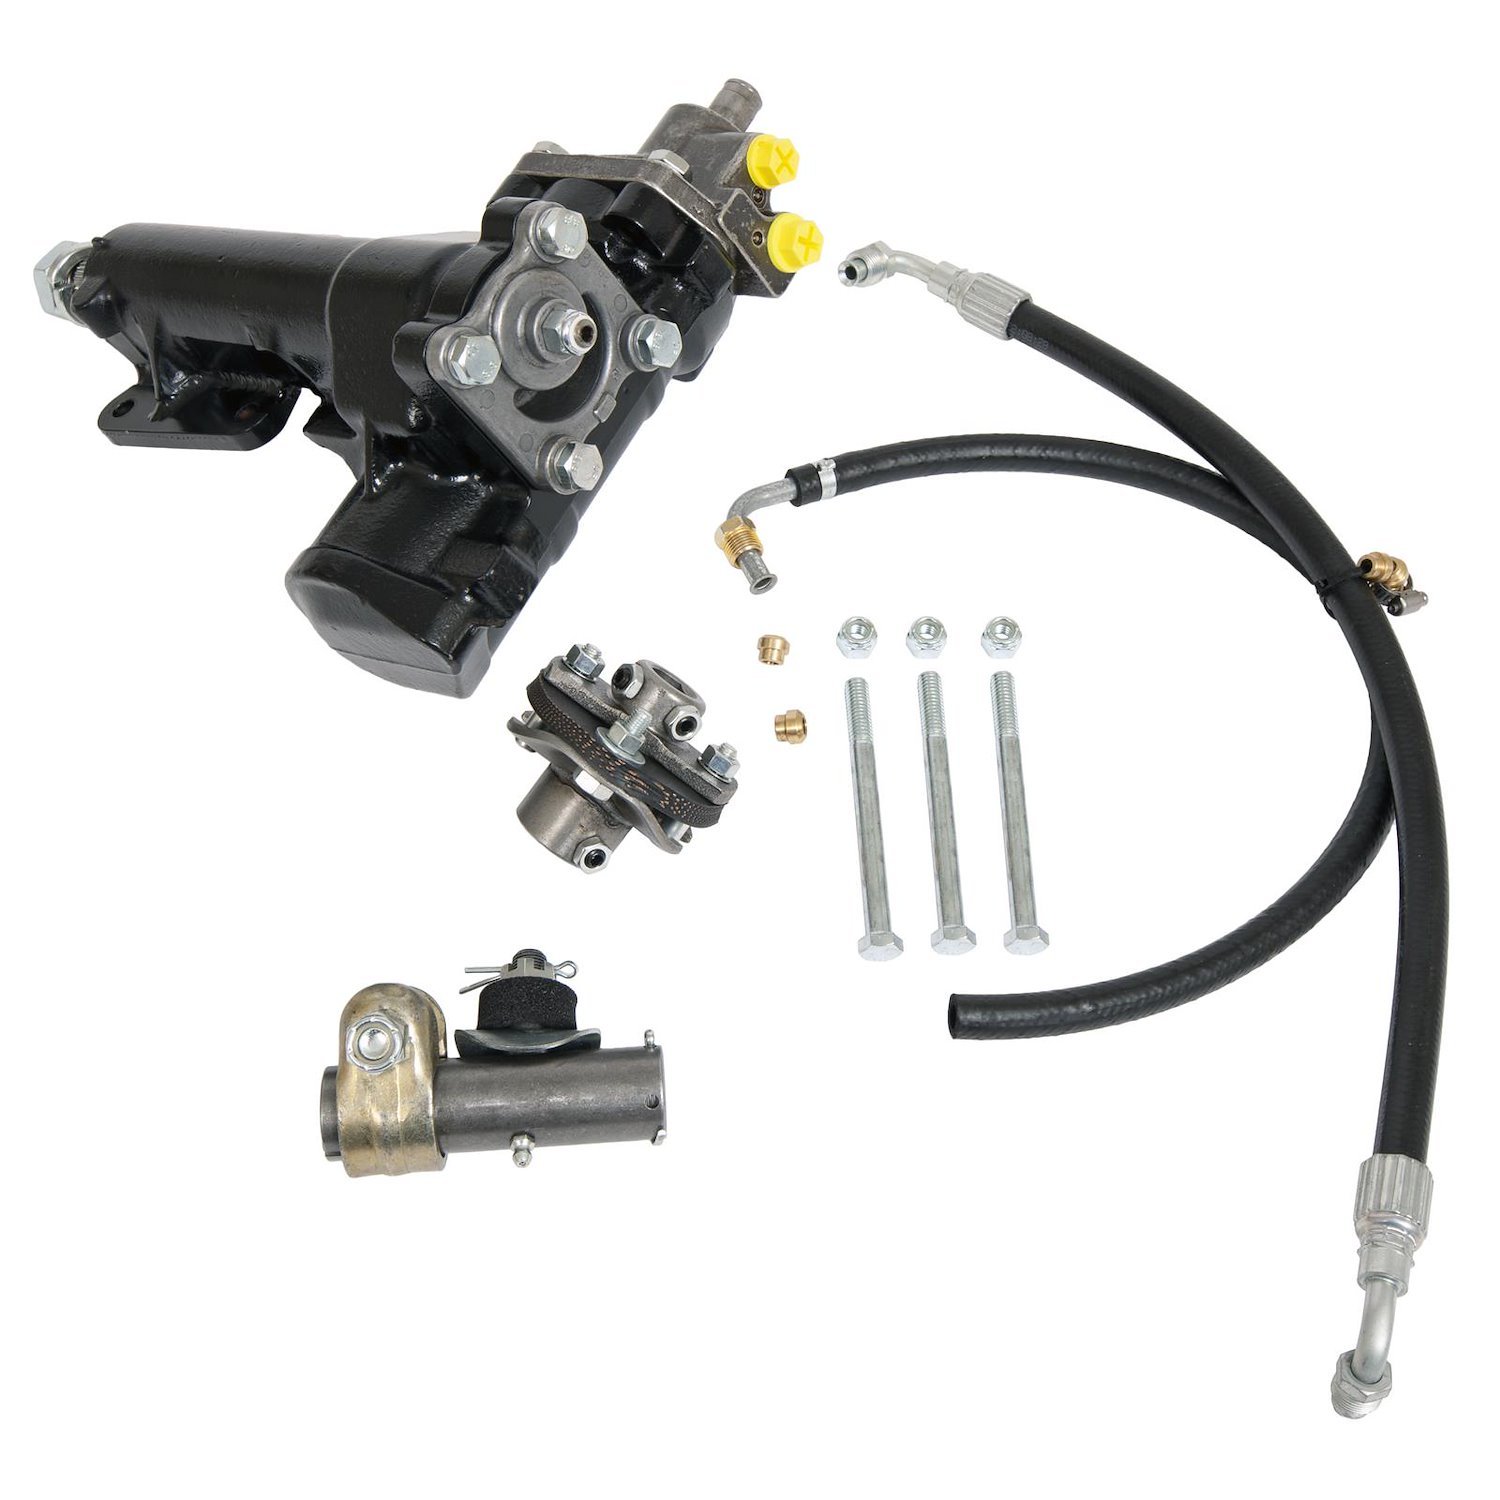 Complete Power Steering Conversion Kit 1967-82 Corvette with Factory Power Steering